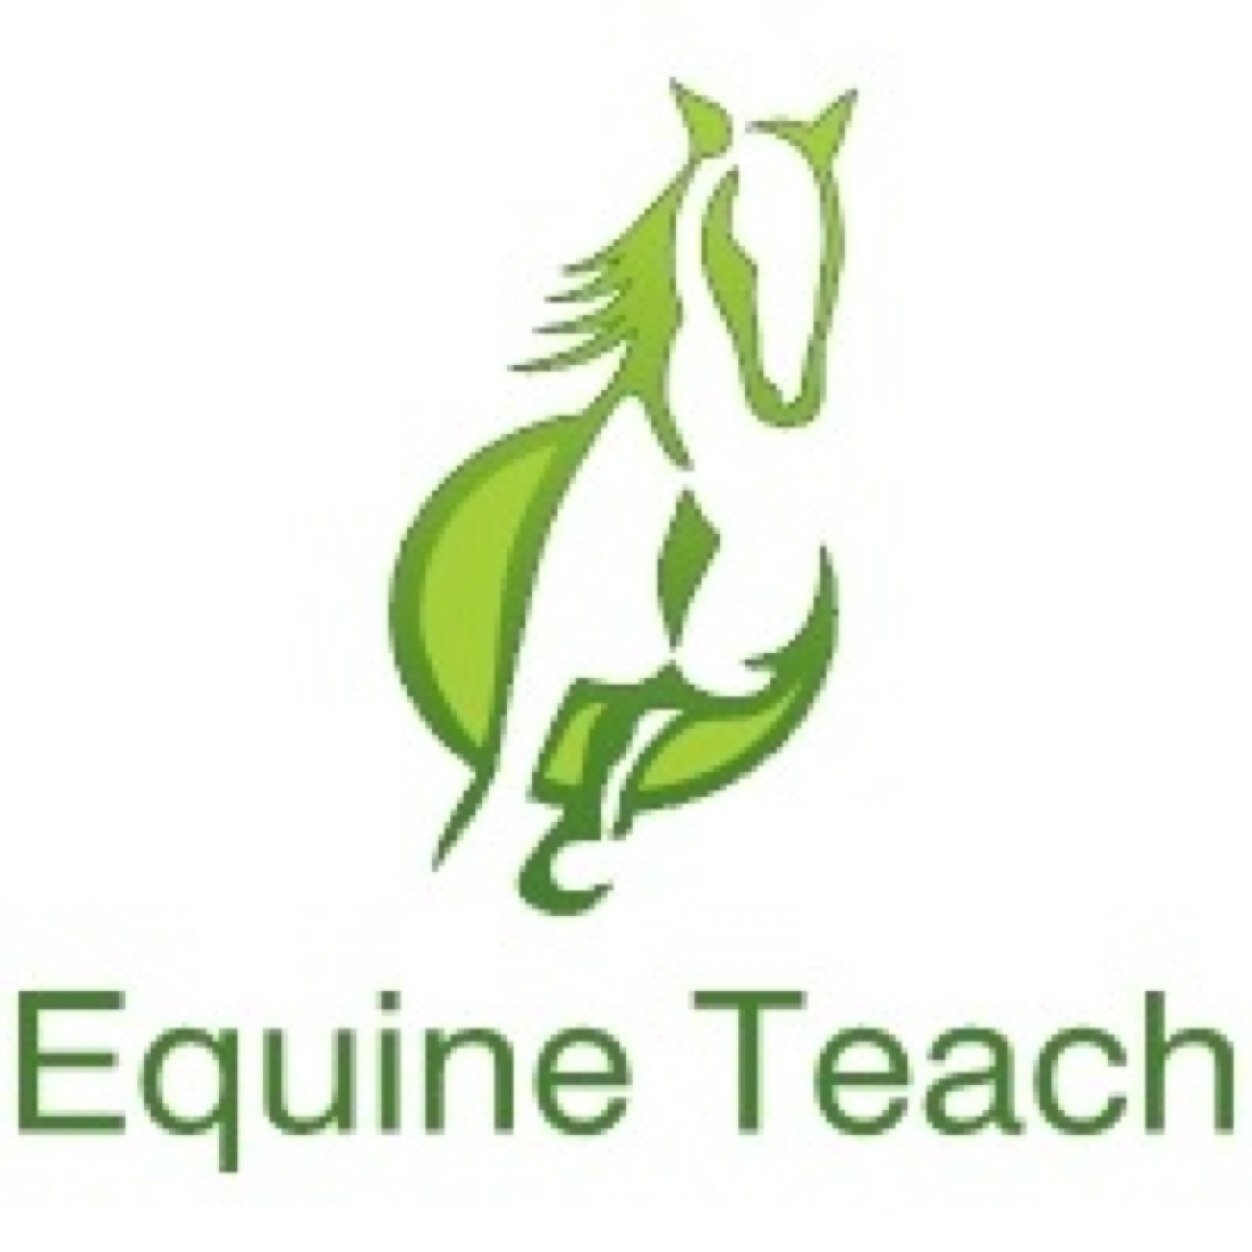 Equine Teach twitter is here for equine tips and facts & a few smiles. #equineteach #horses #pony #biomechanics #feeding #science #riding #freelancecoach